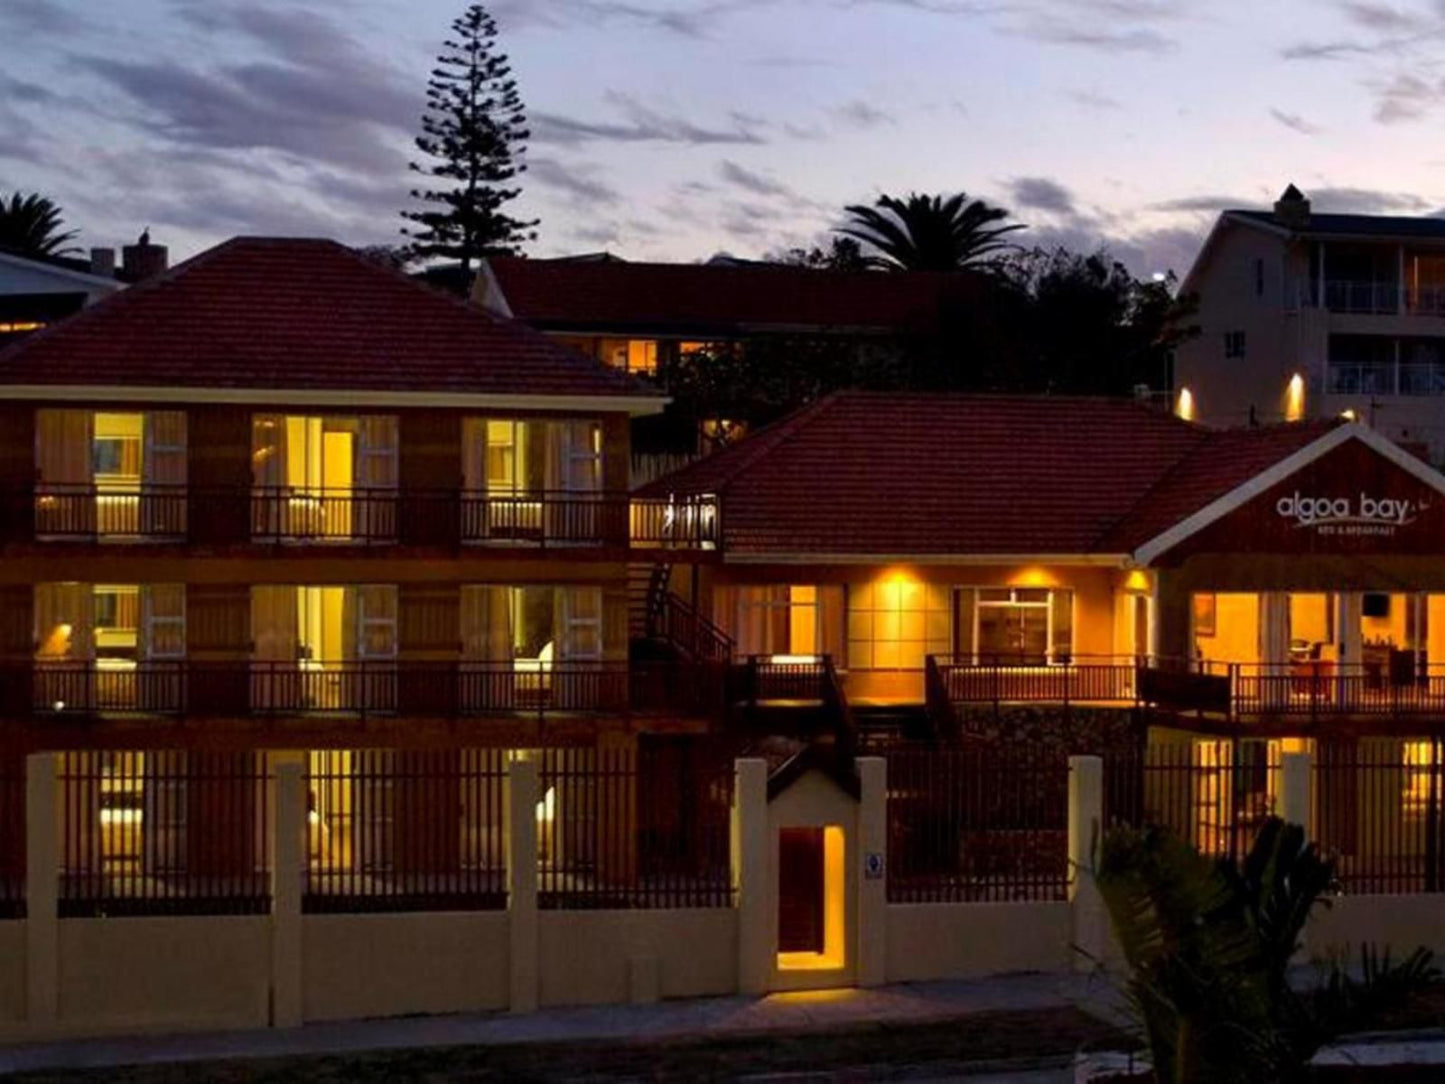 Algoa Bay Bed And Breakfast Humewood Port Elizabeth Eastern Cape South Africa House, Building, Architecture, Palm Tree, Plant, Nature, Wood